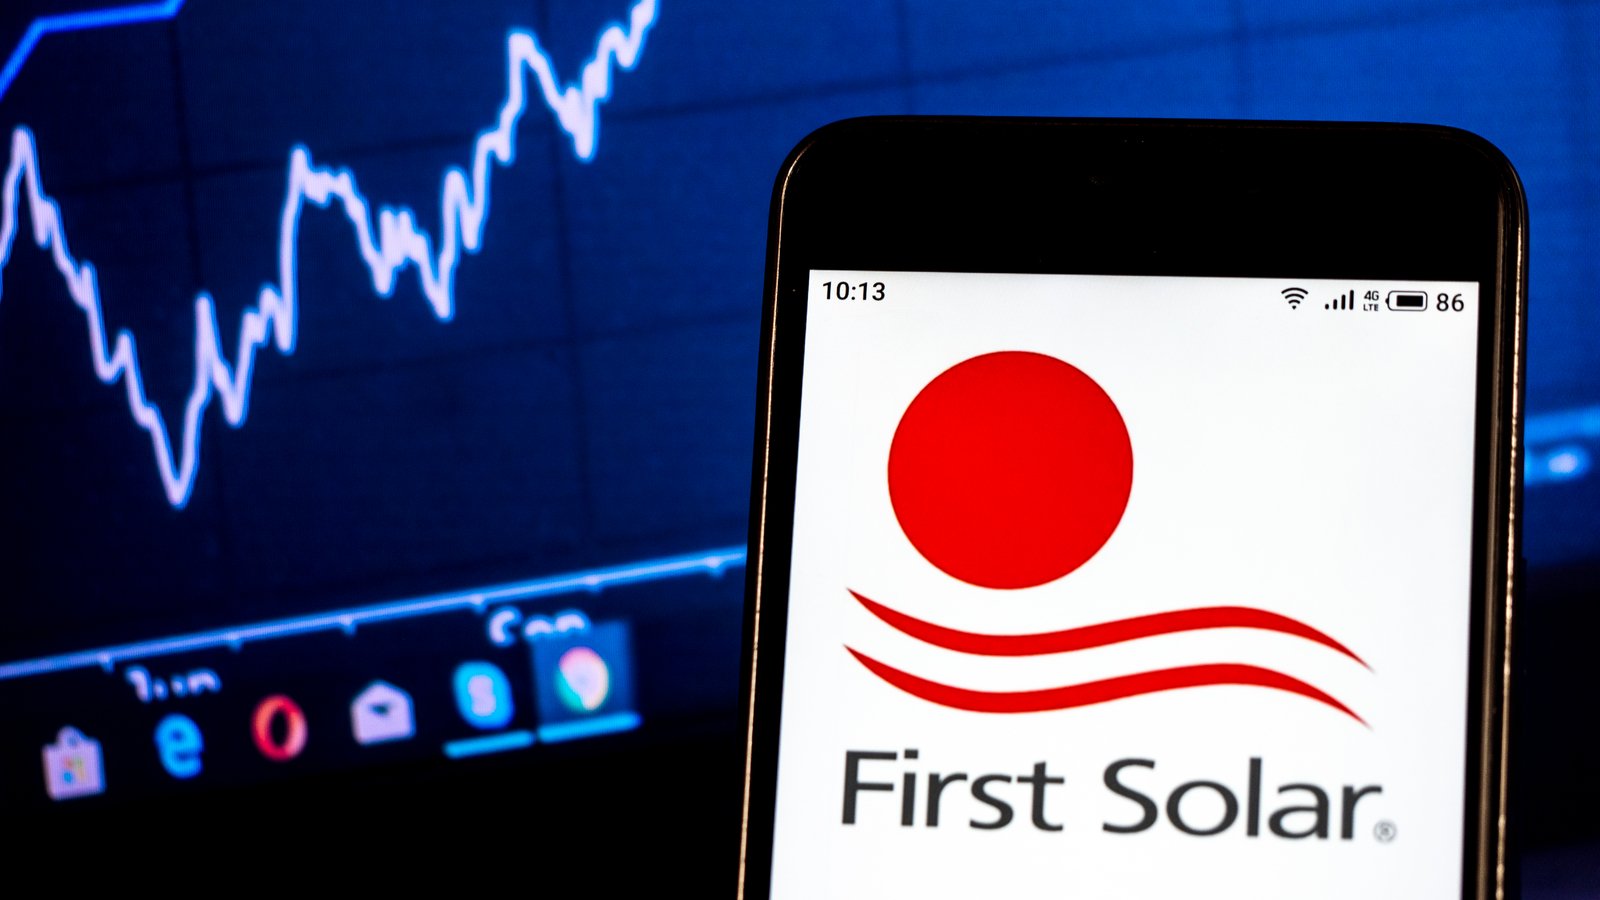 First Solar logo on smartphone in front of computer screen with graphs. FSLR stock